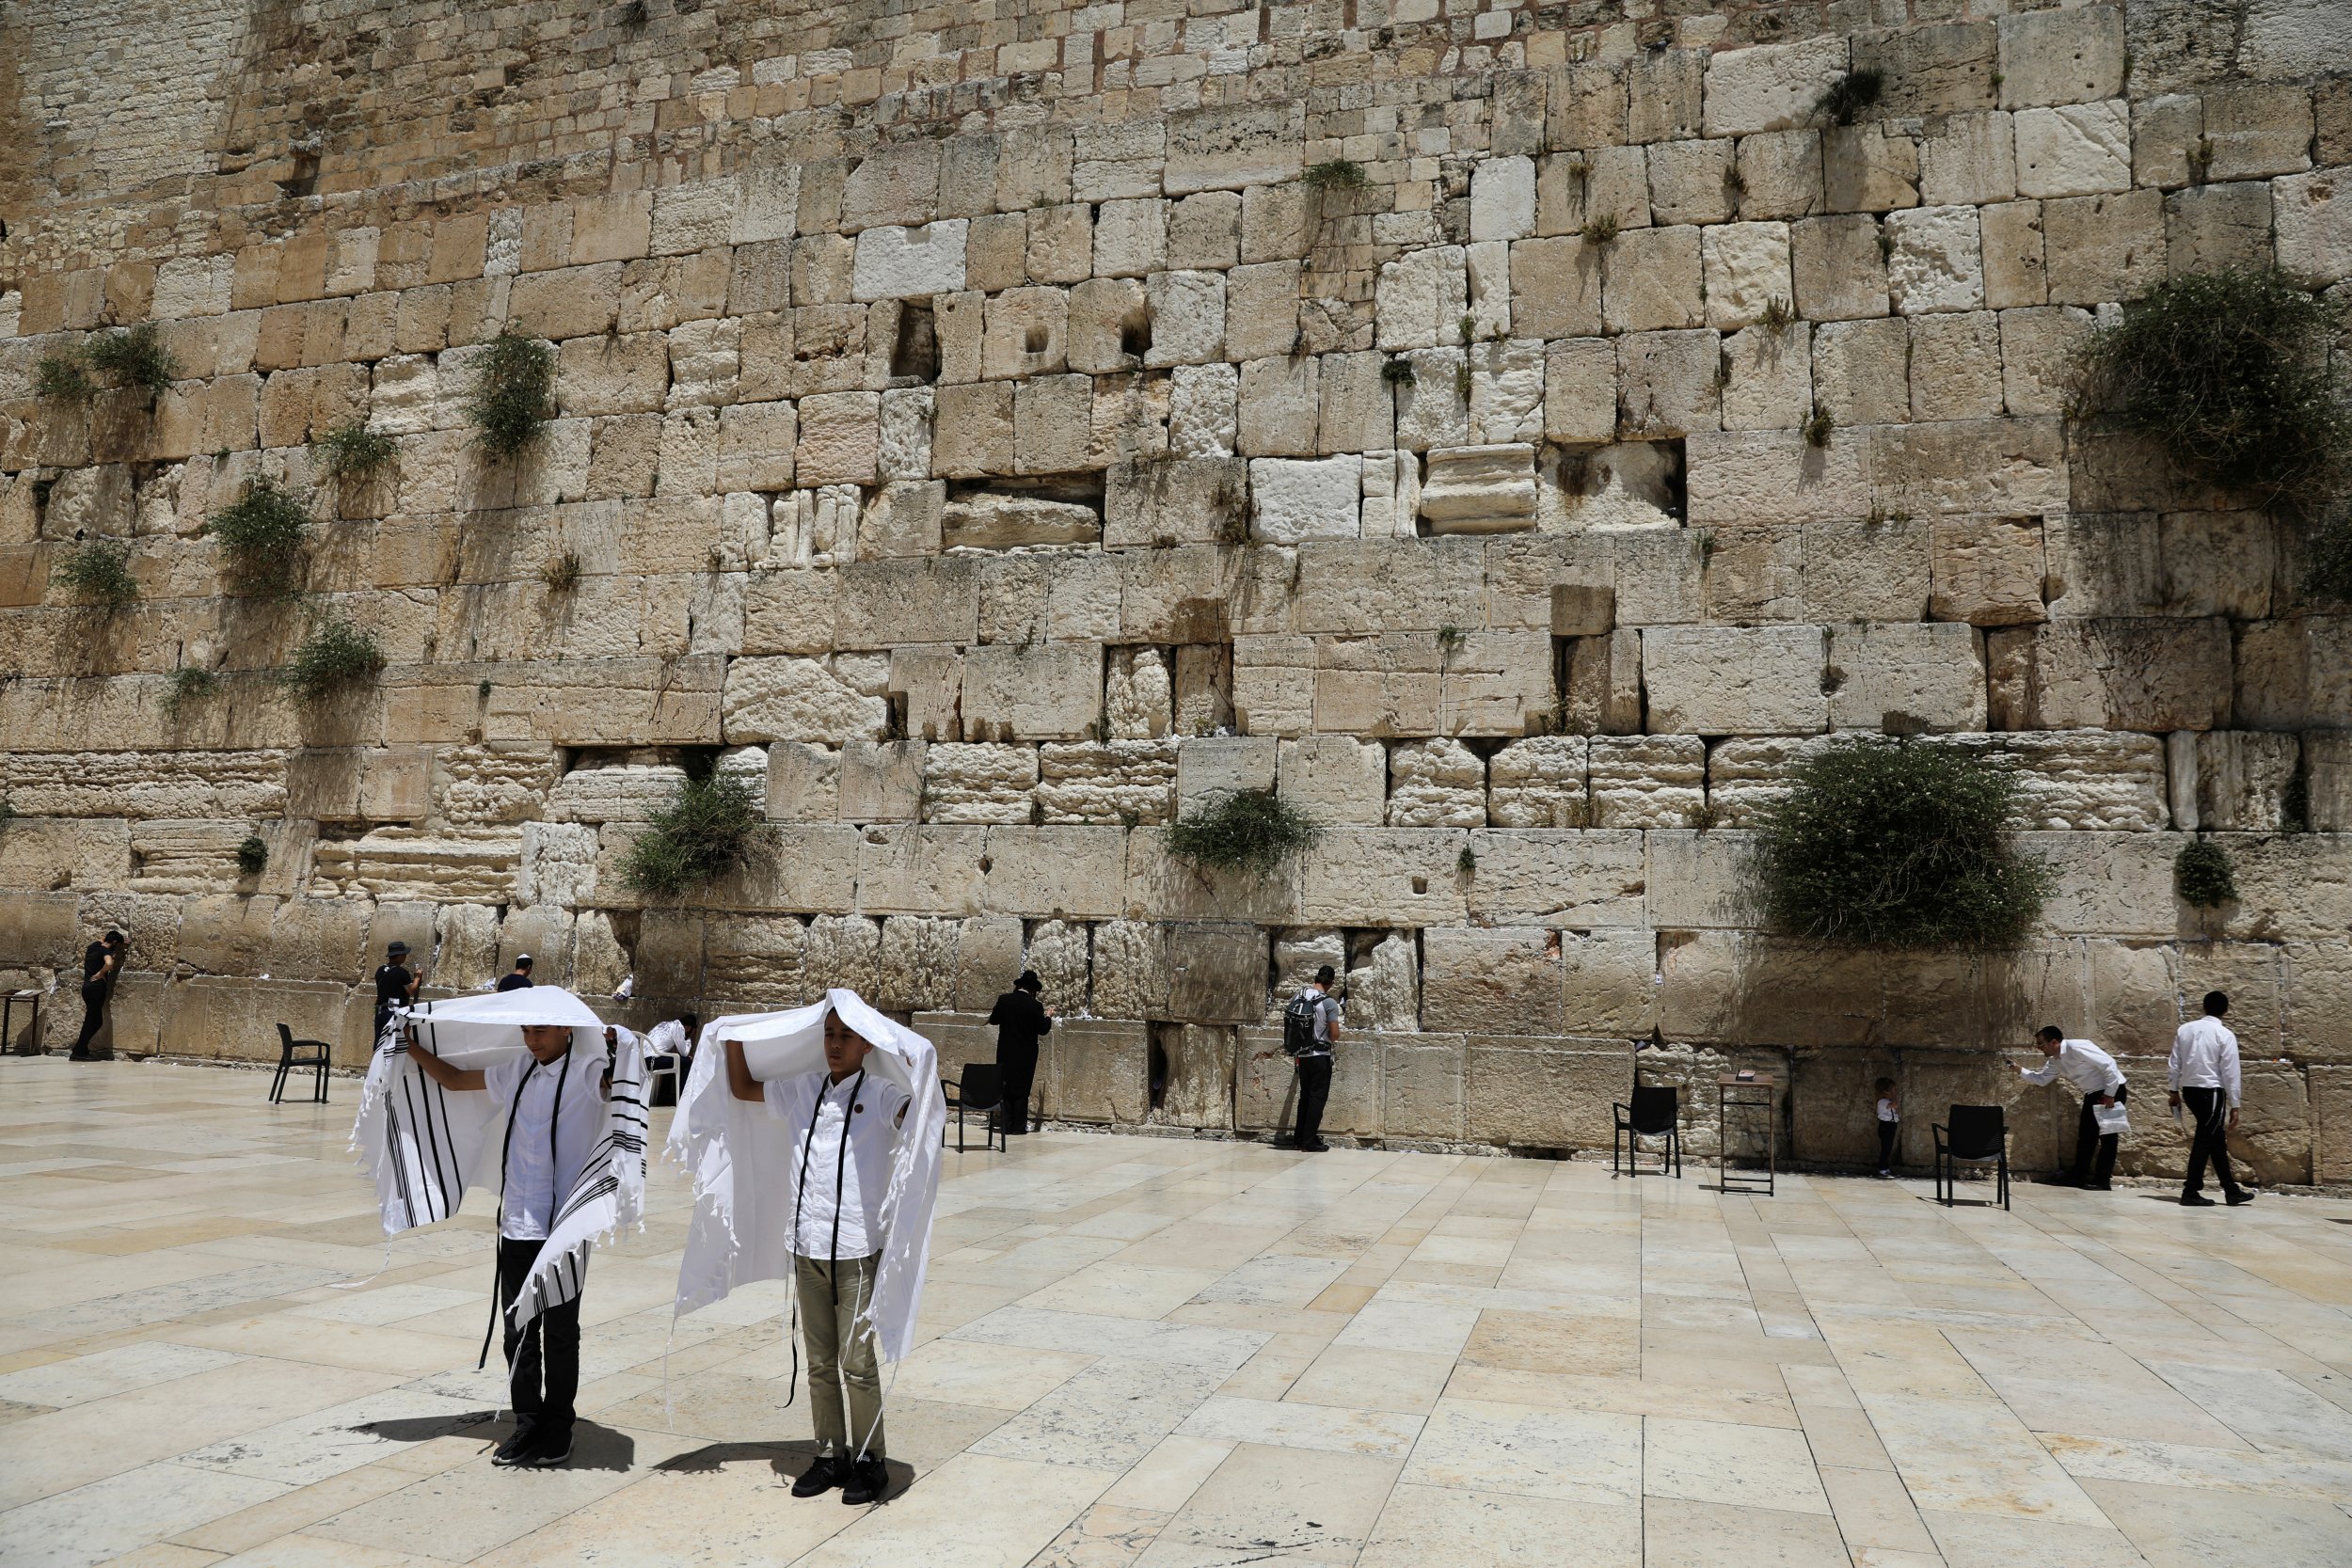 Donald Trump at the Western Wall: Why Is the U.S. President's Visit to ...